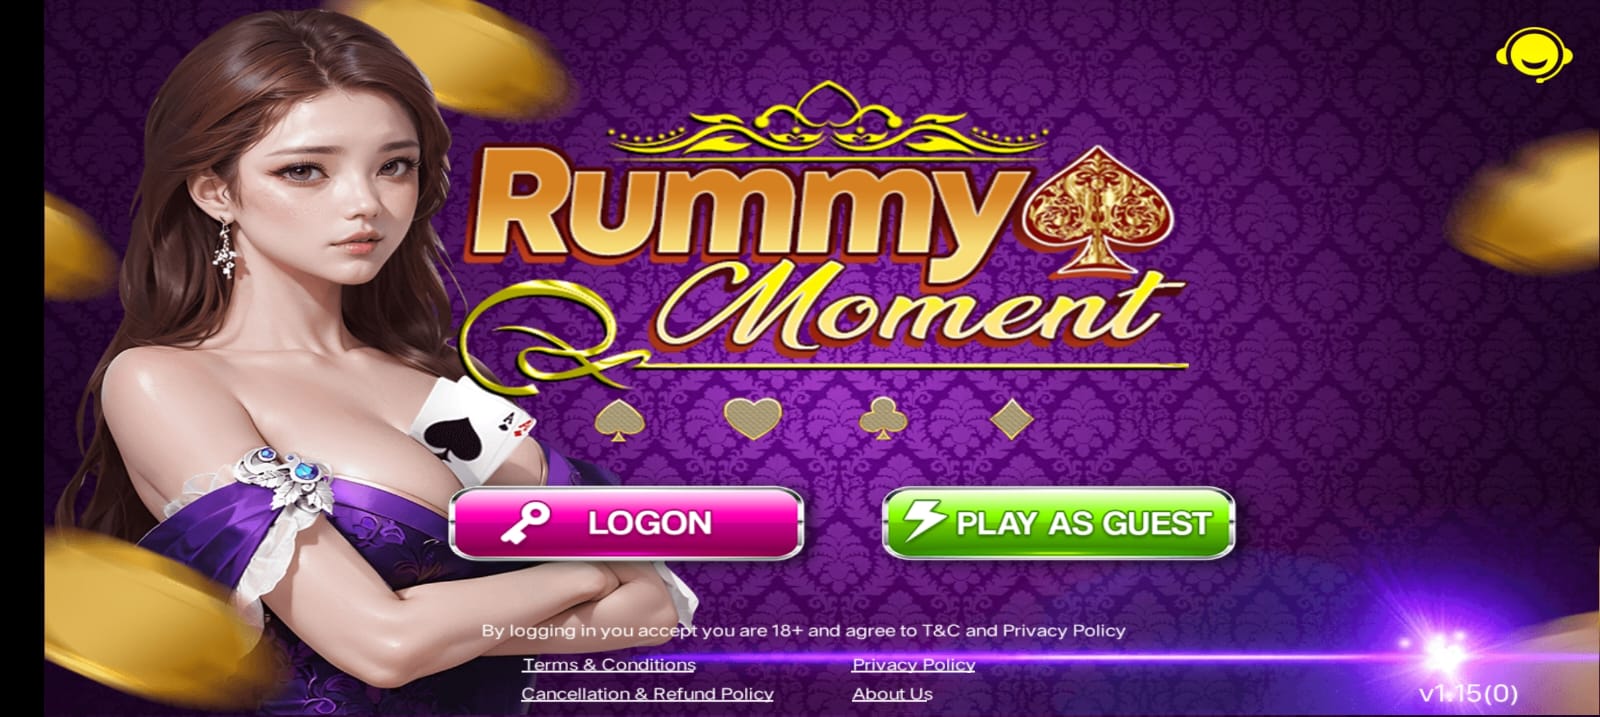 Moment Rummy Application